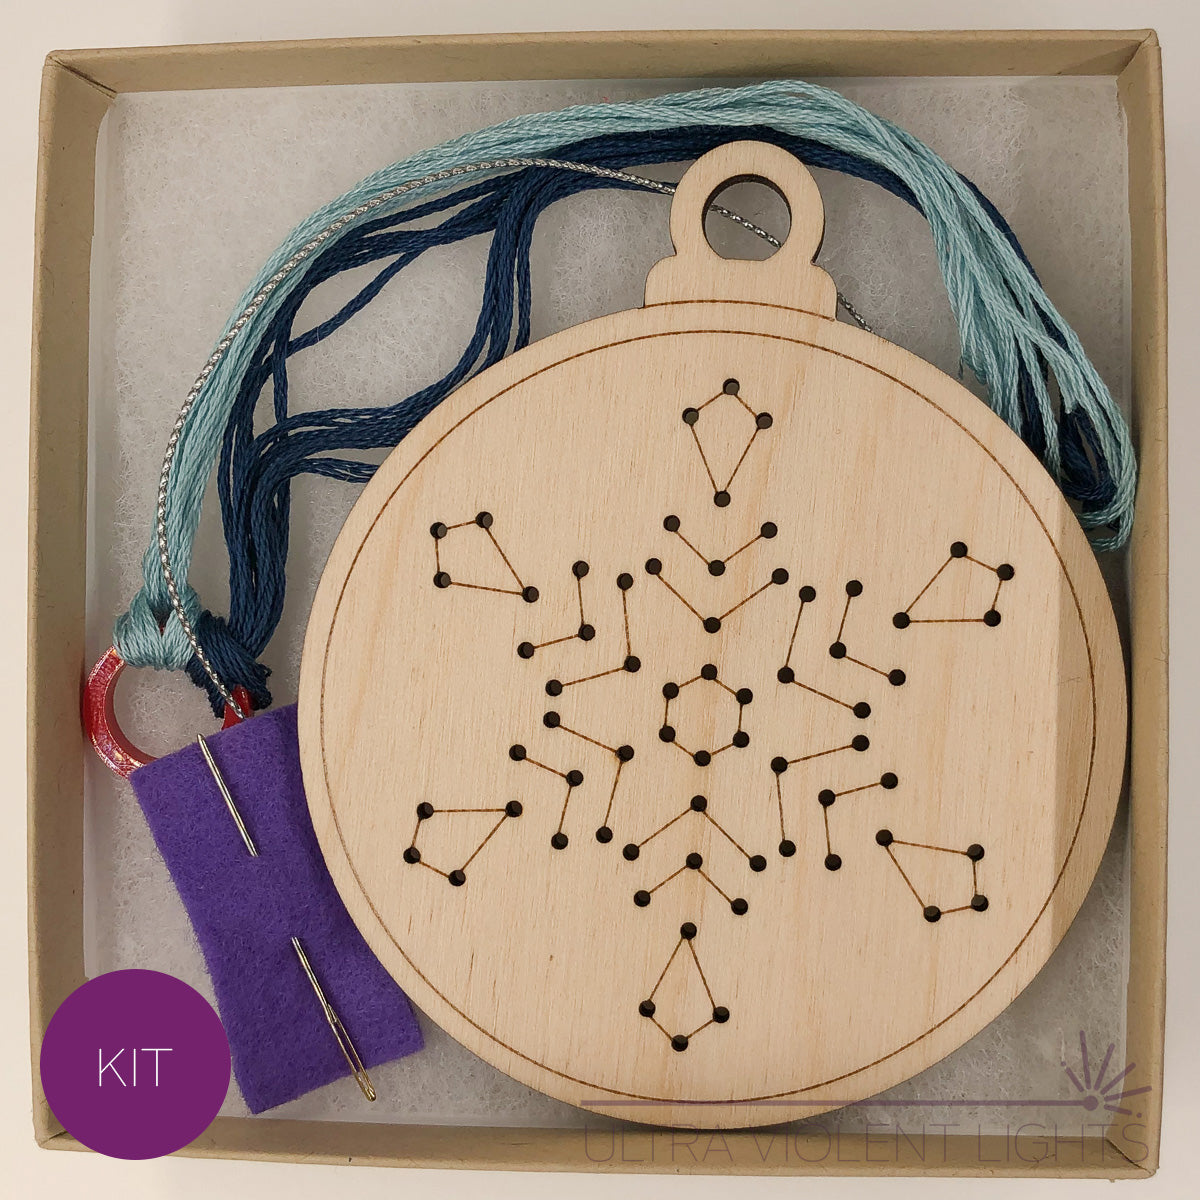 A snowflake wooden embroidery kit with floss and a needle in a box